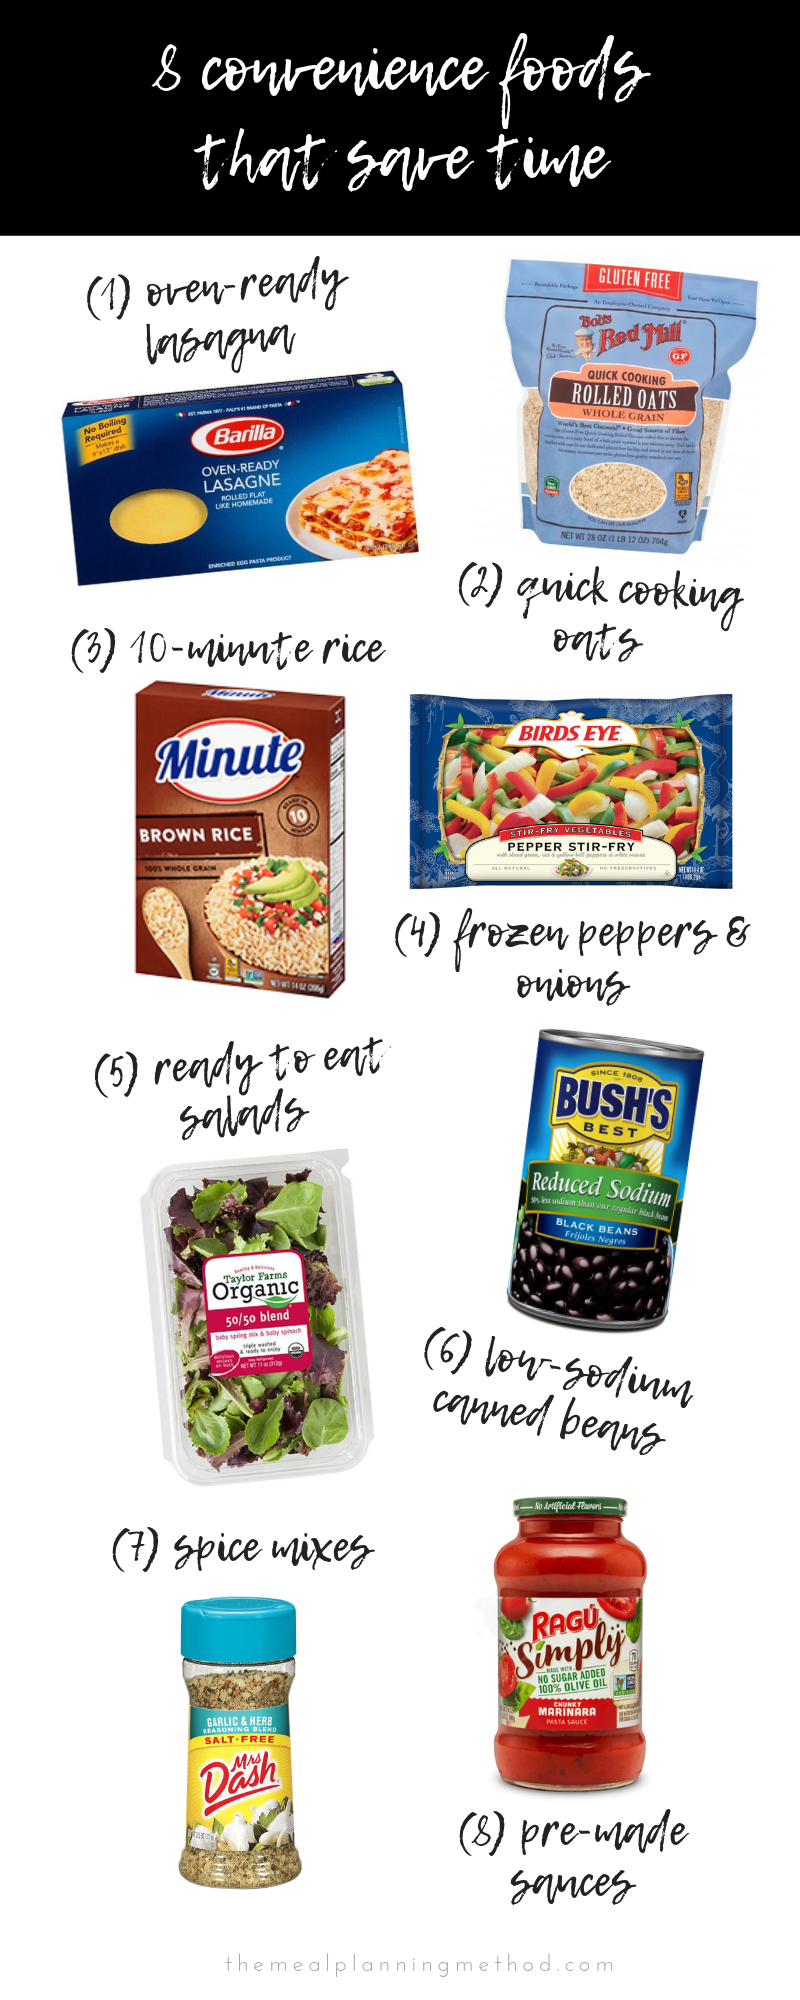 convenience foods that save time - The Meal Planning Method